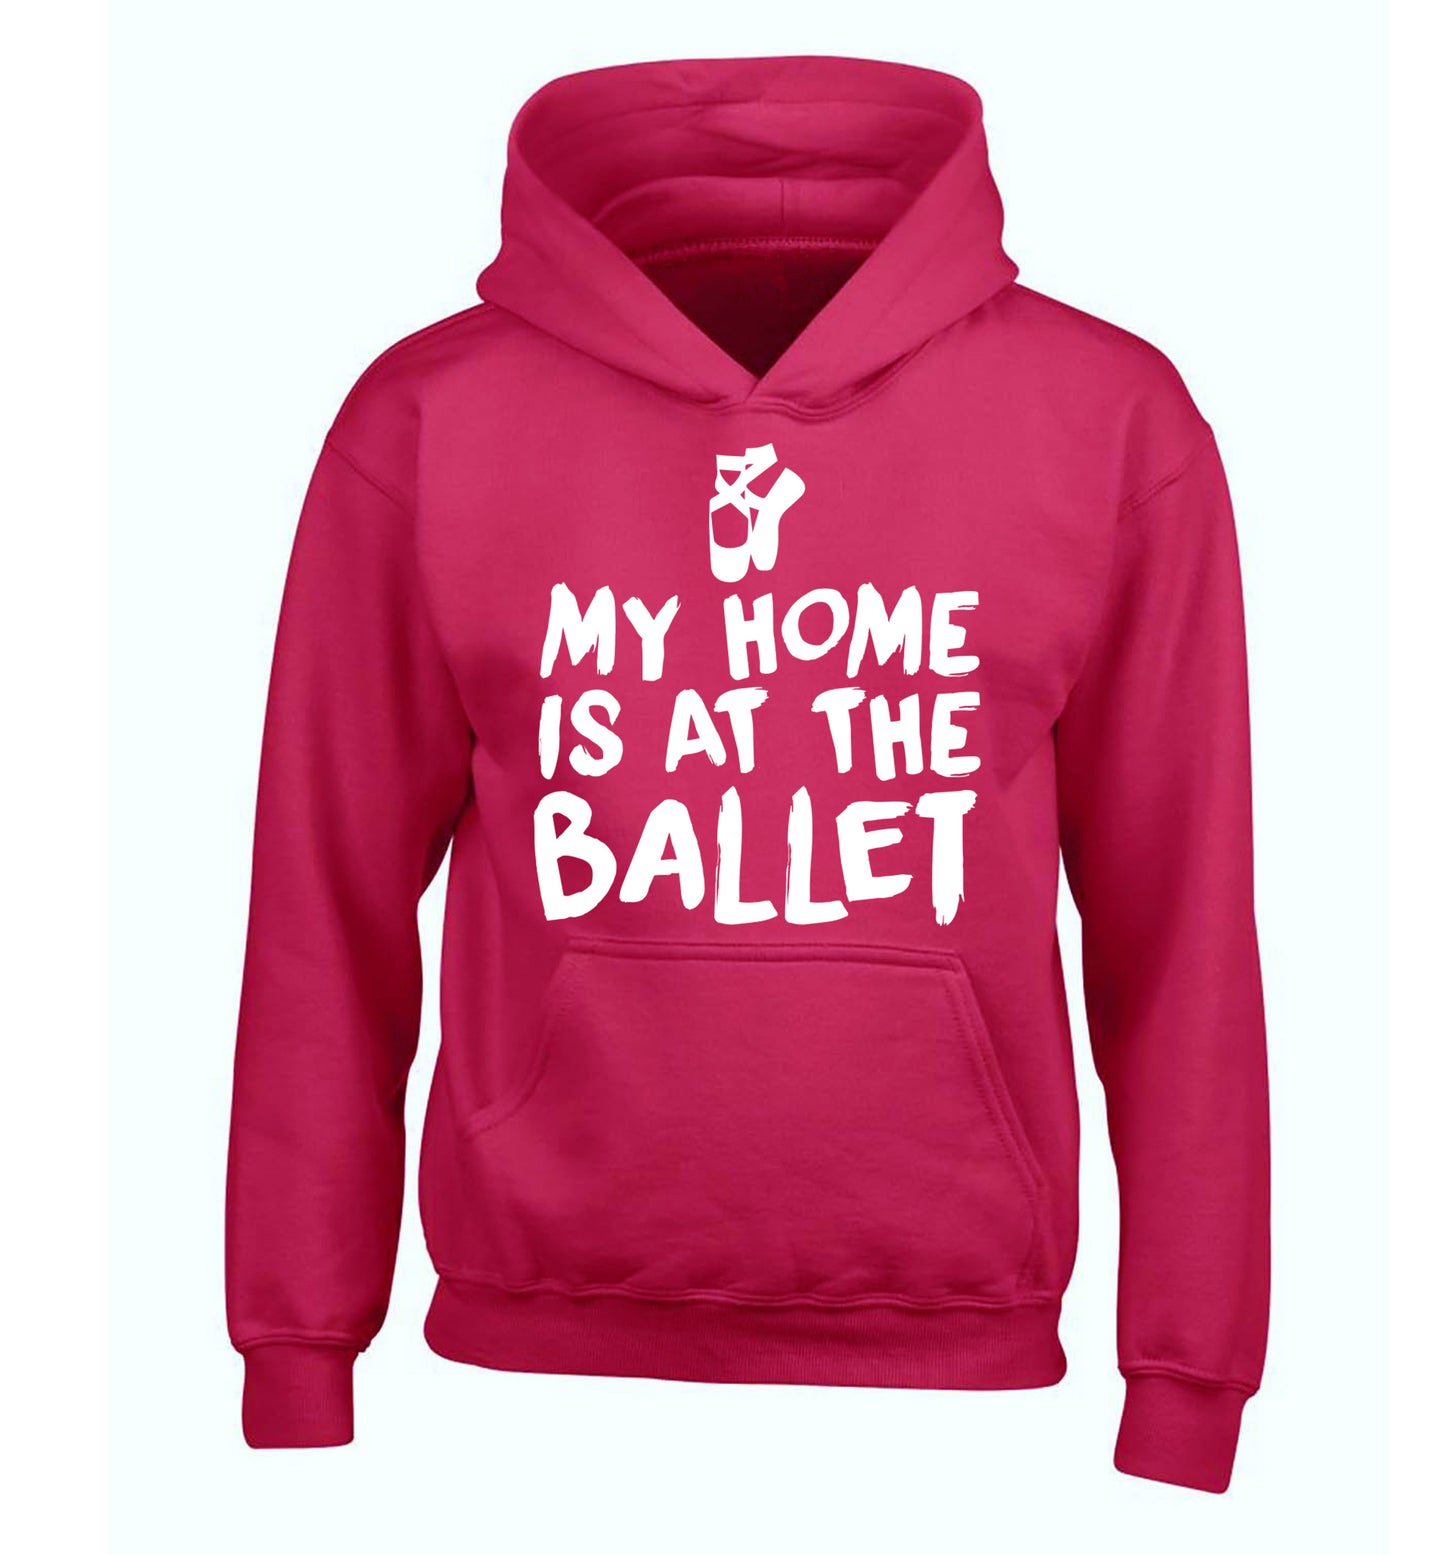 My home is at the ballet children's pink hoodie 12-14 Years